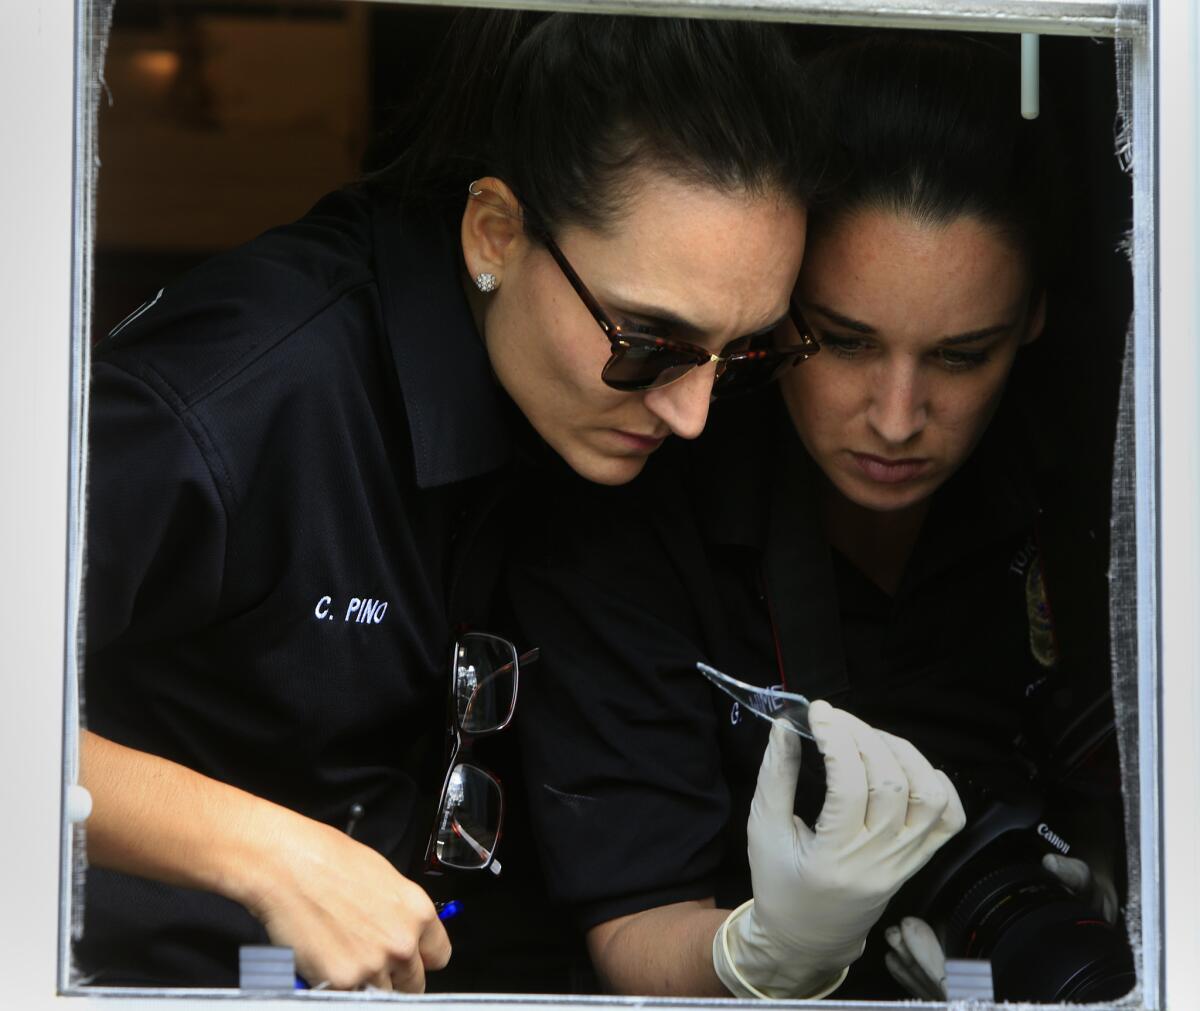 Christina Pino, left, and Gabrielle Wimer look for evidence at a burglary scene.